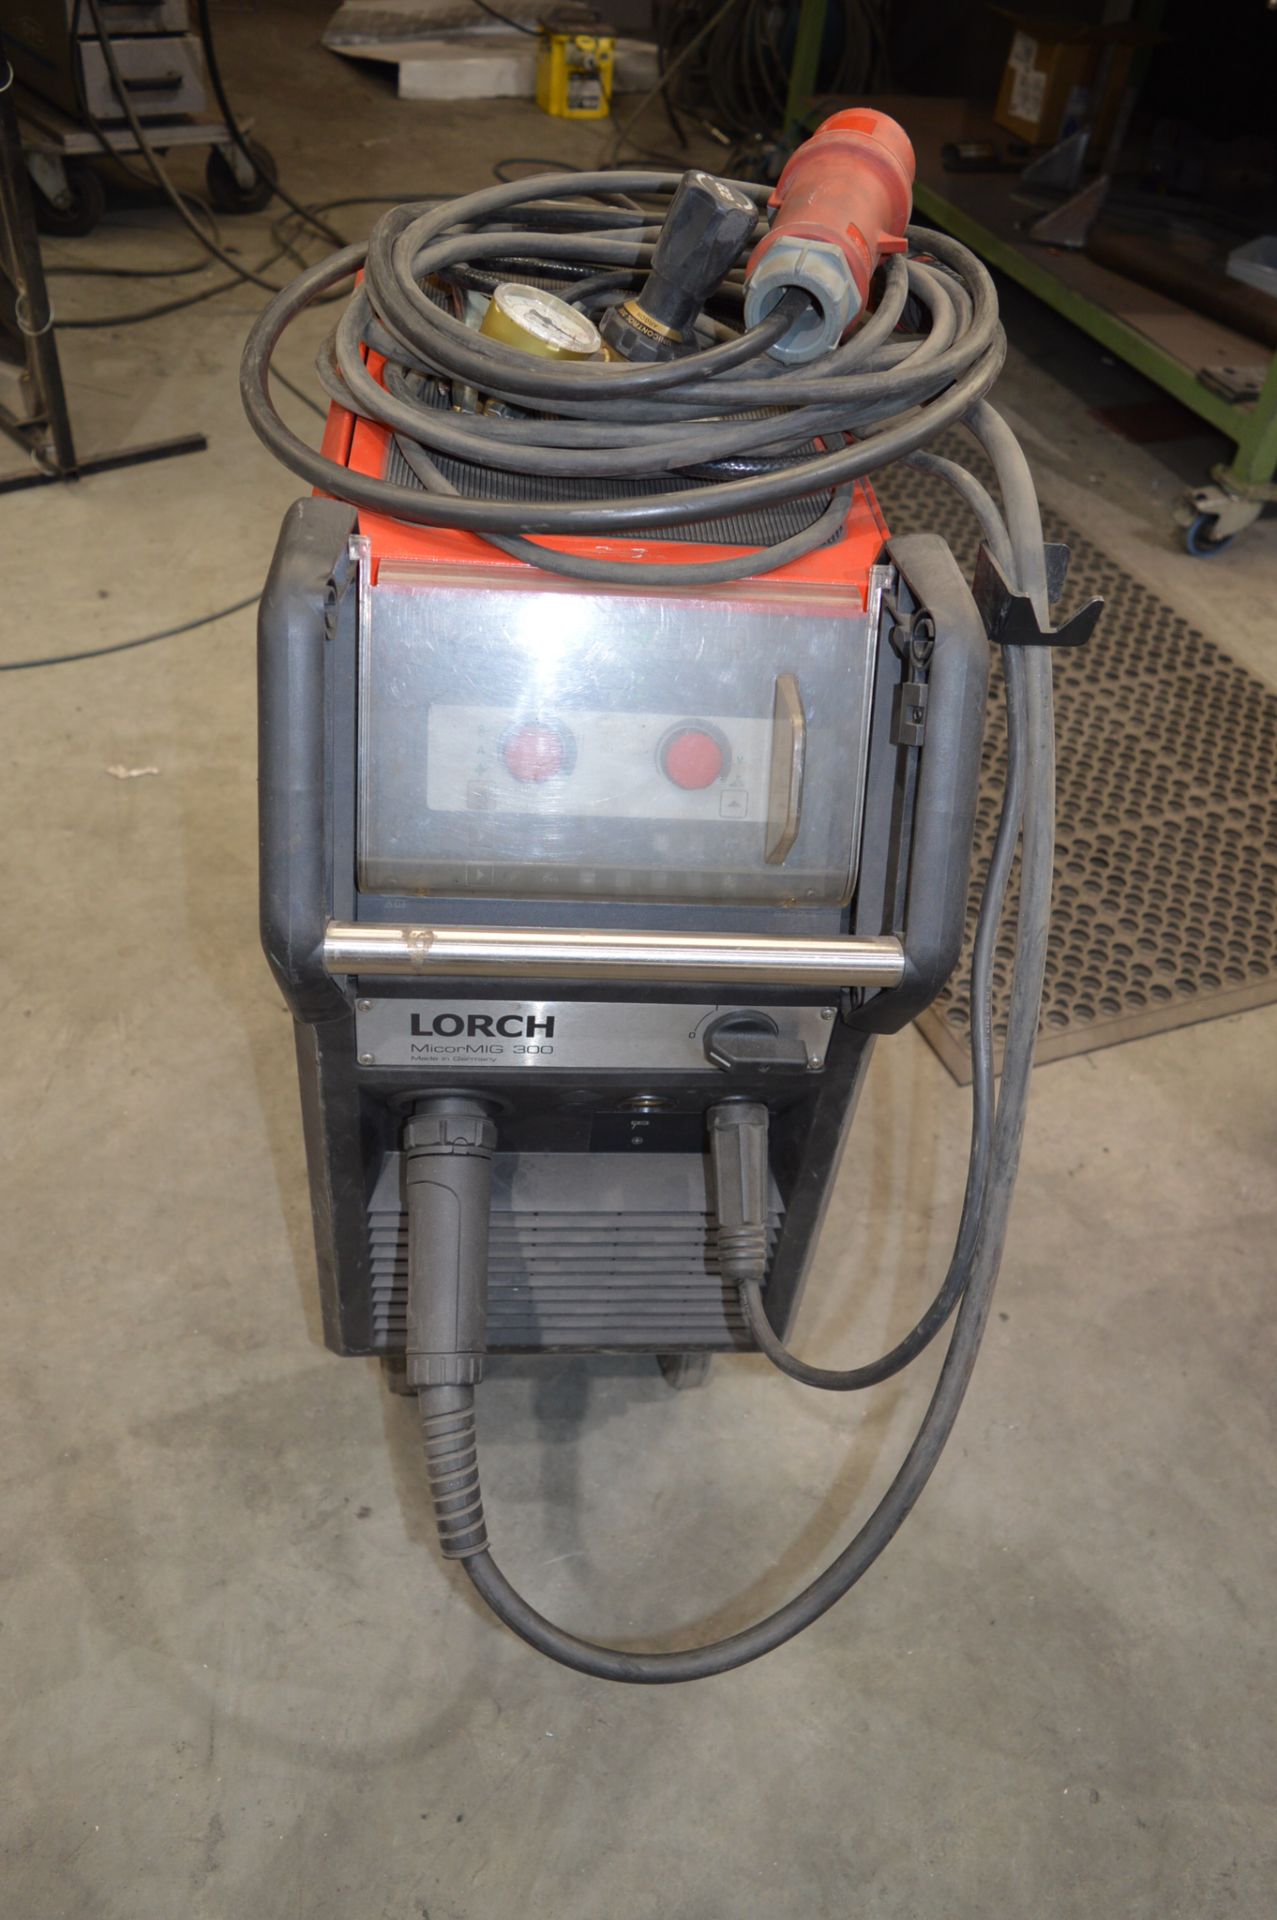 Lorch Micromig 300 MIG welder S/N: 4064-2630-0007-4 c/w torch, regulator and earth lead - Image 2 of 5